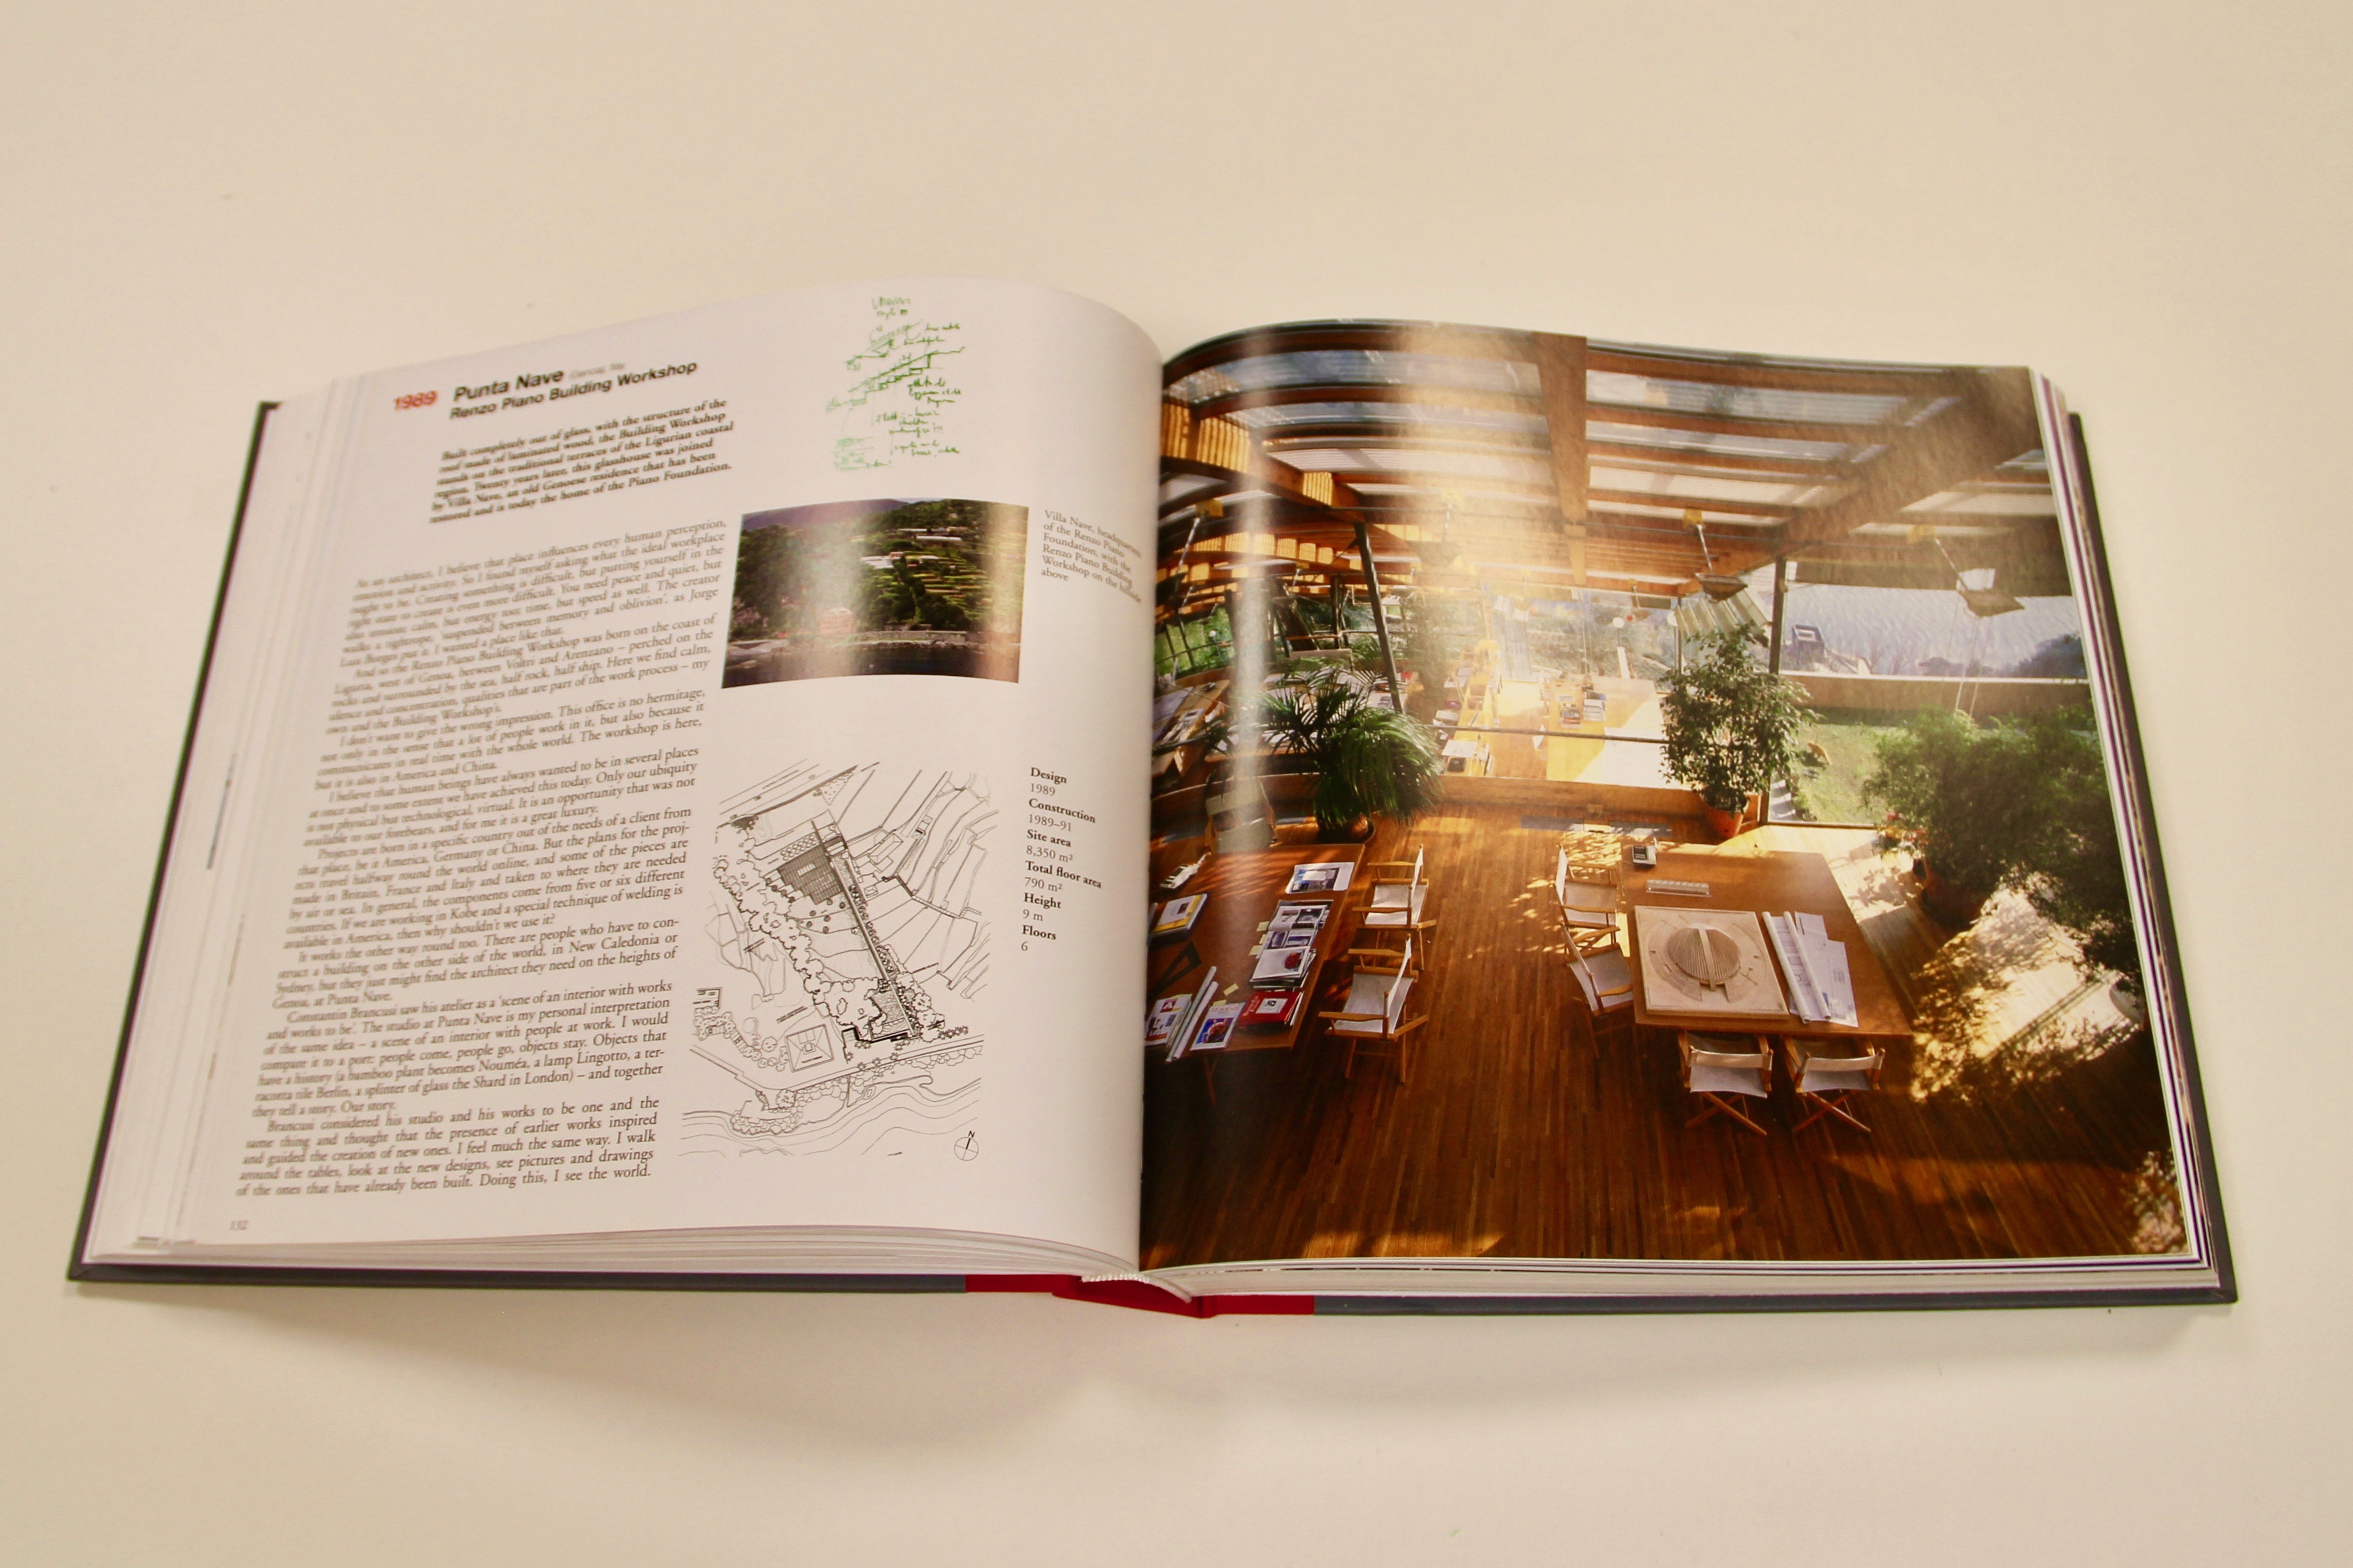 It's a Big World: A Review of Renzo Piano's The Complete Logbook